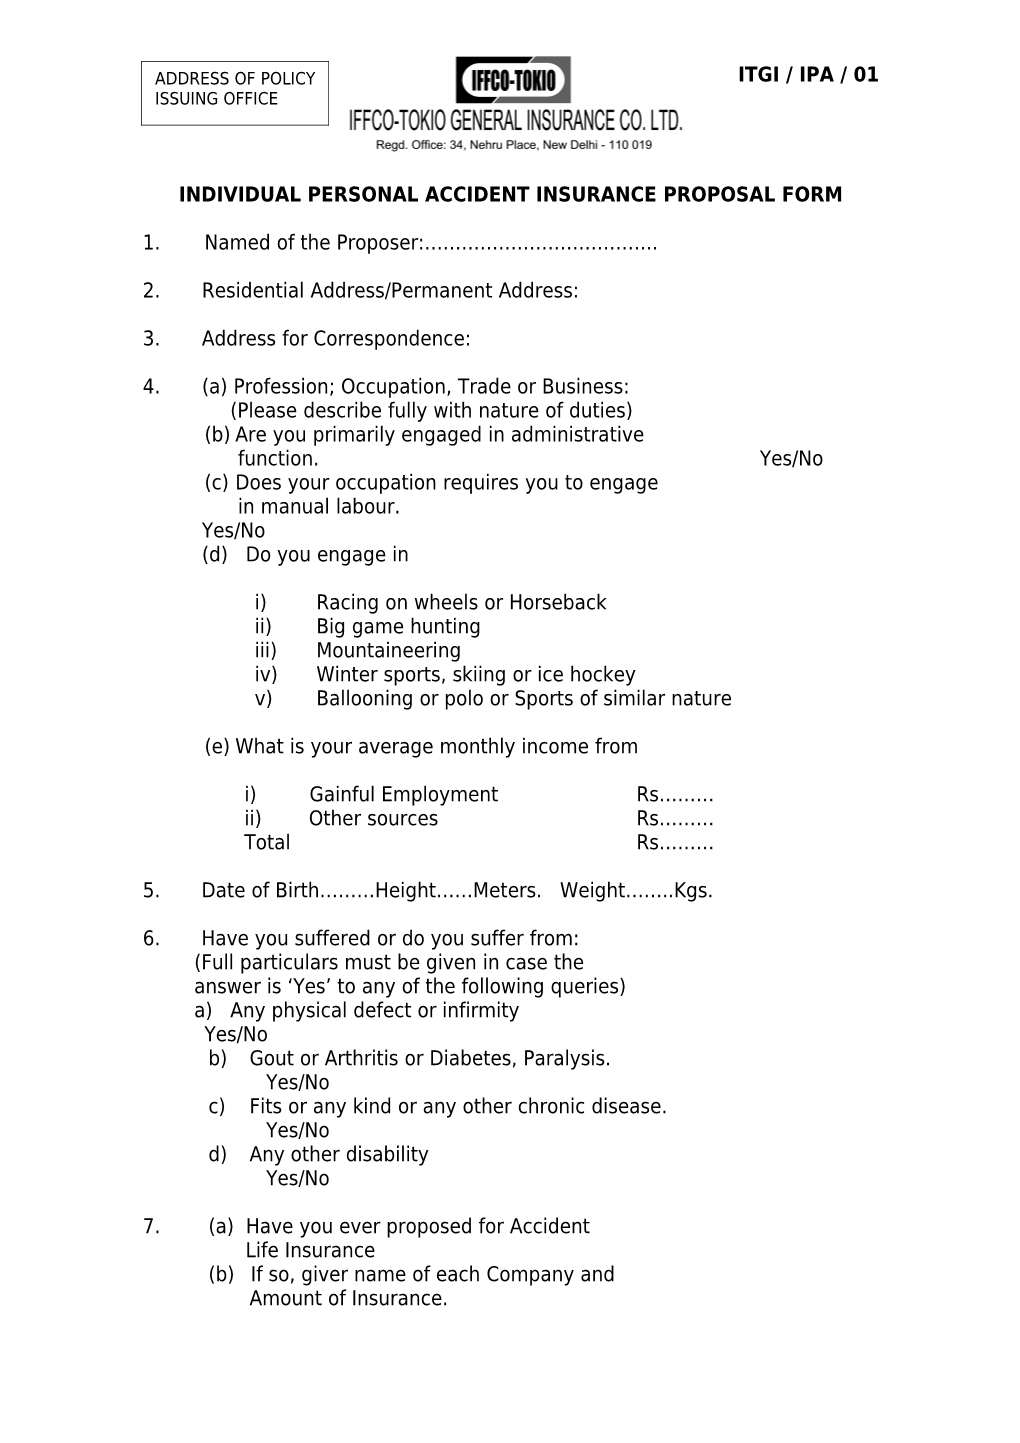 Individual Personal Accident Insurance Proposal Form